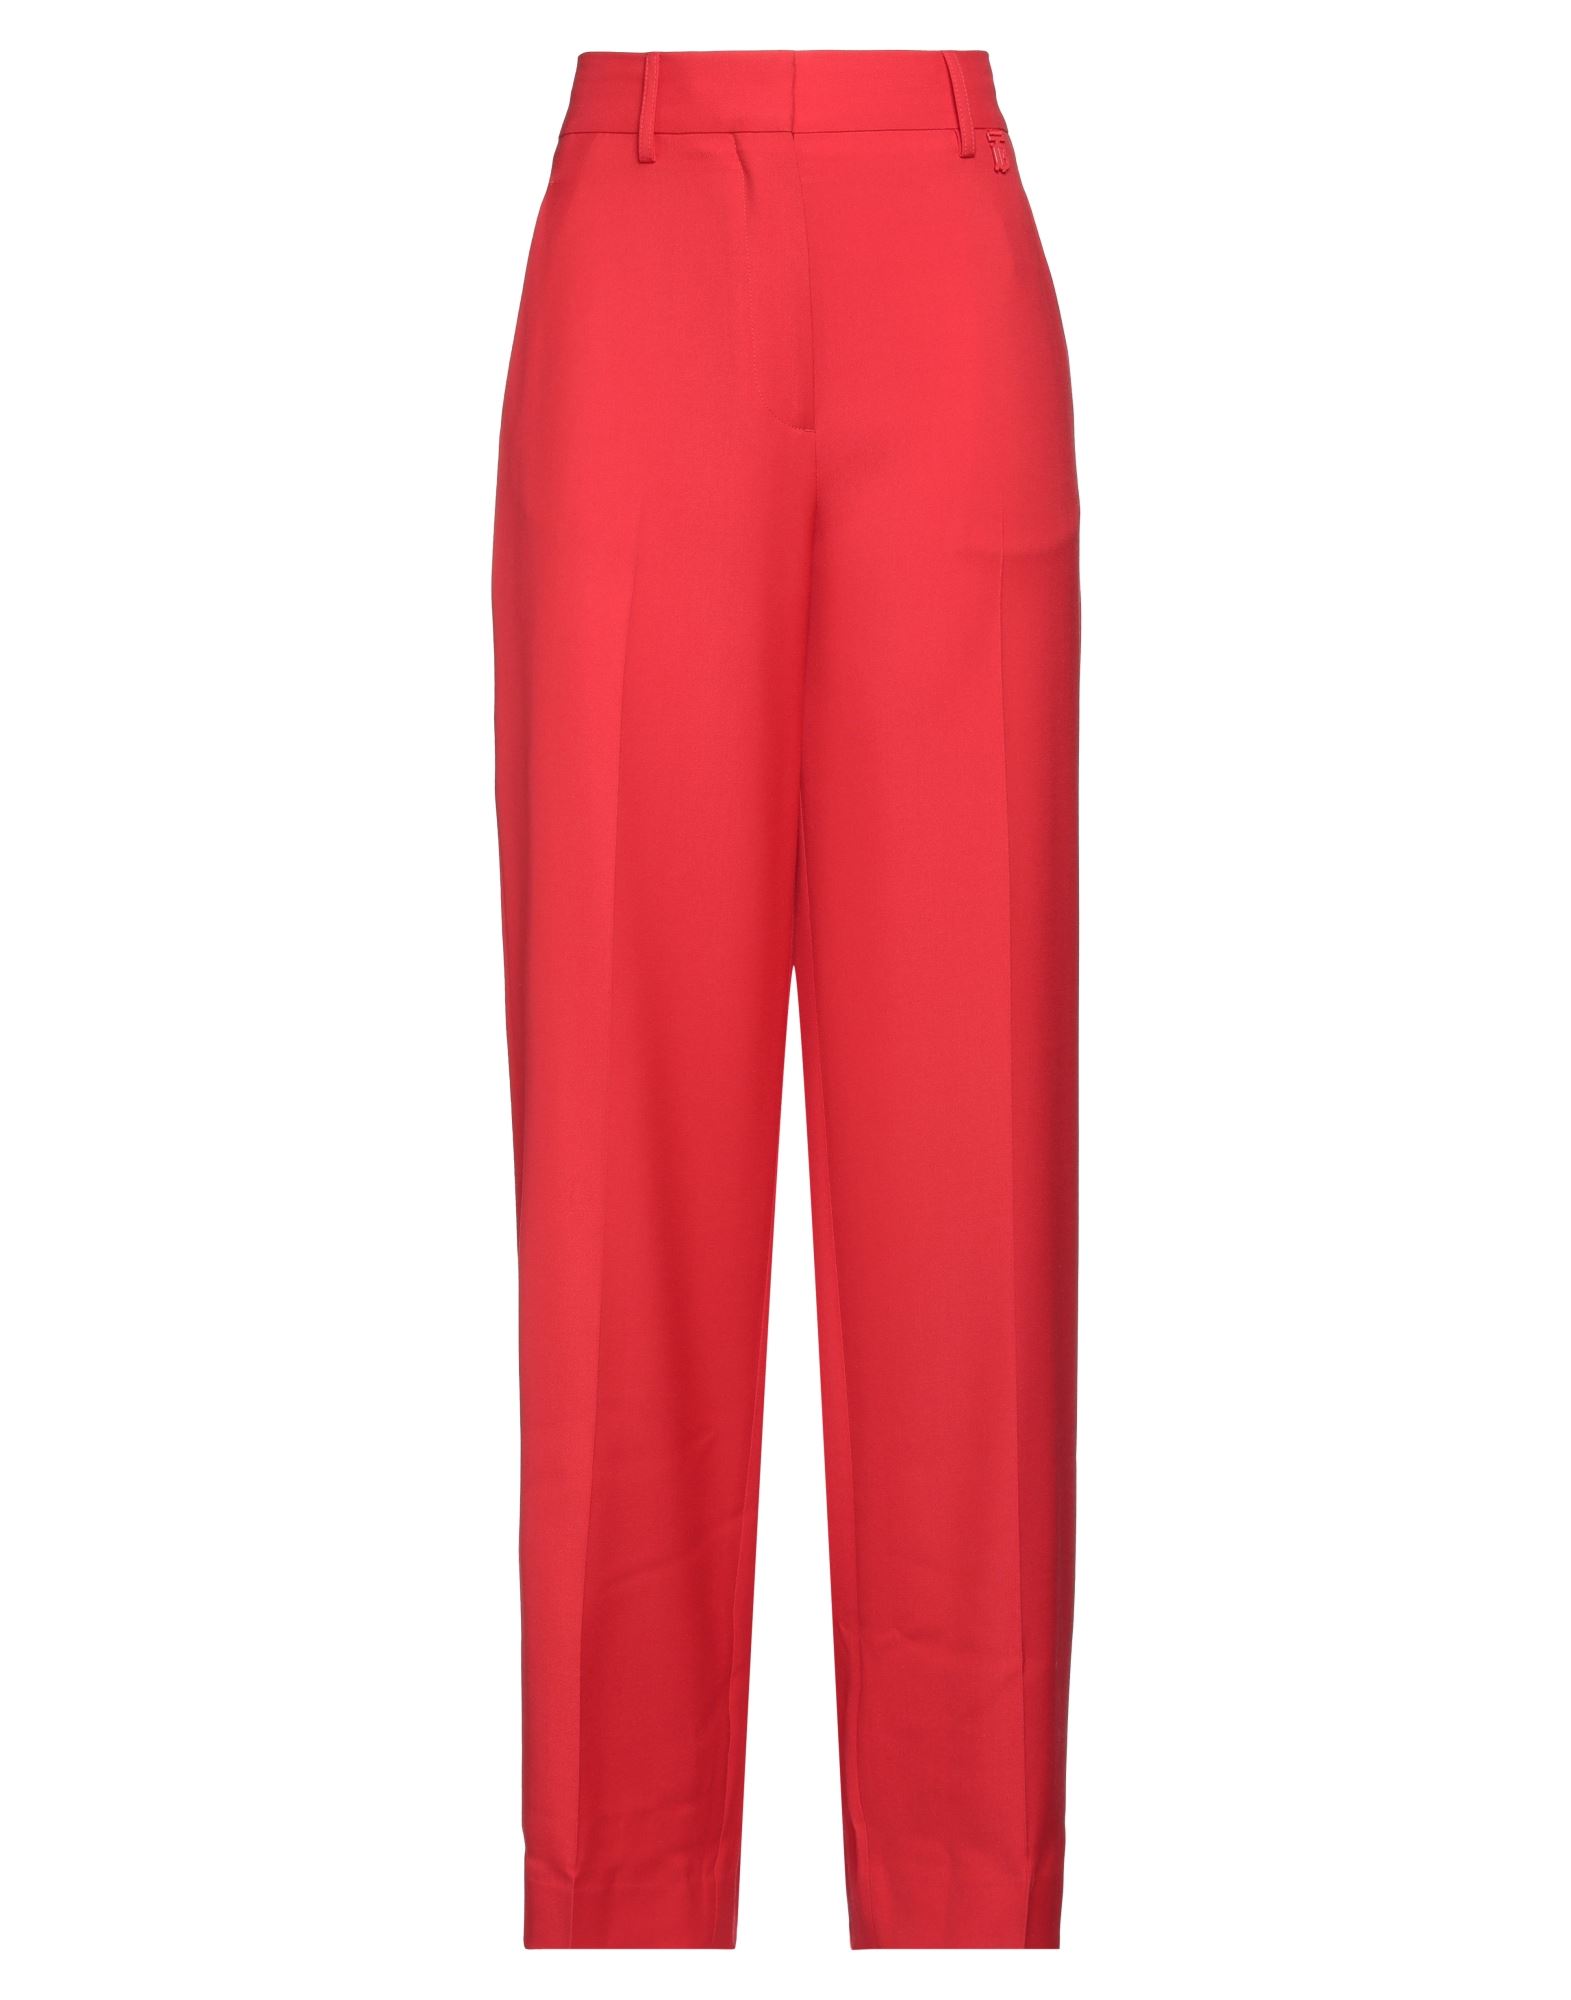 BURBERRY BURBERRY WOMAN PANTS RED SIZE 6 VIRGIN WOOL